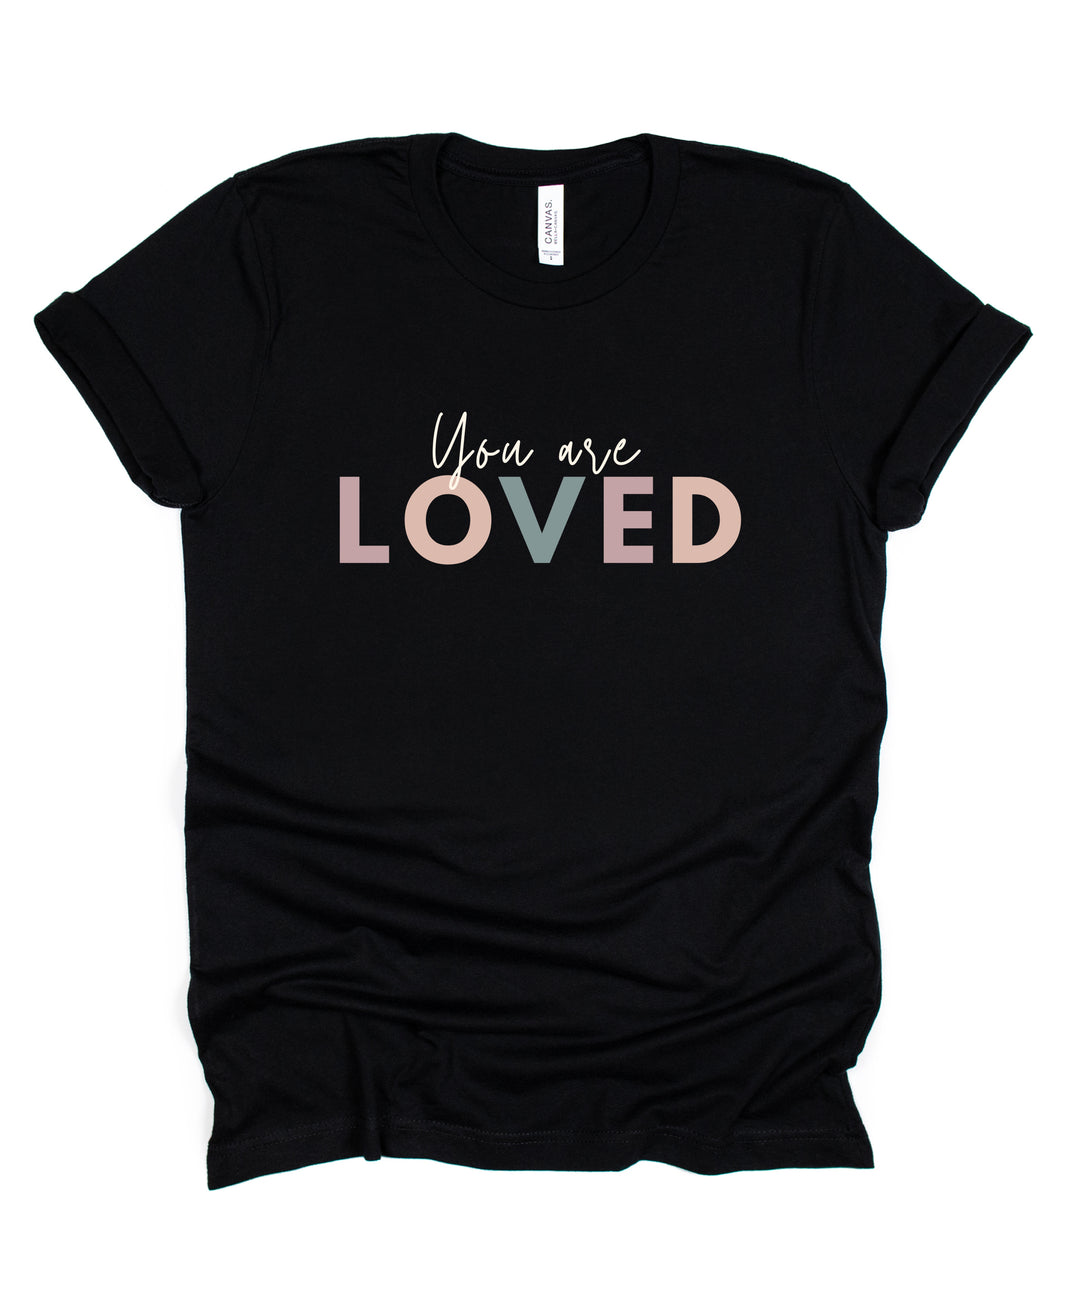 You are Loved - Unisex Crew-Neck Tee - Joy & Country